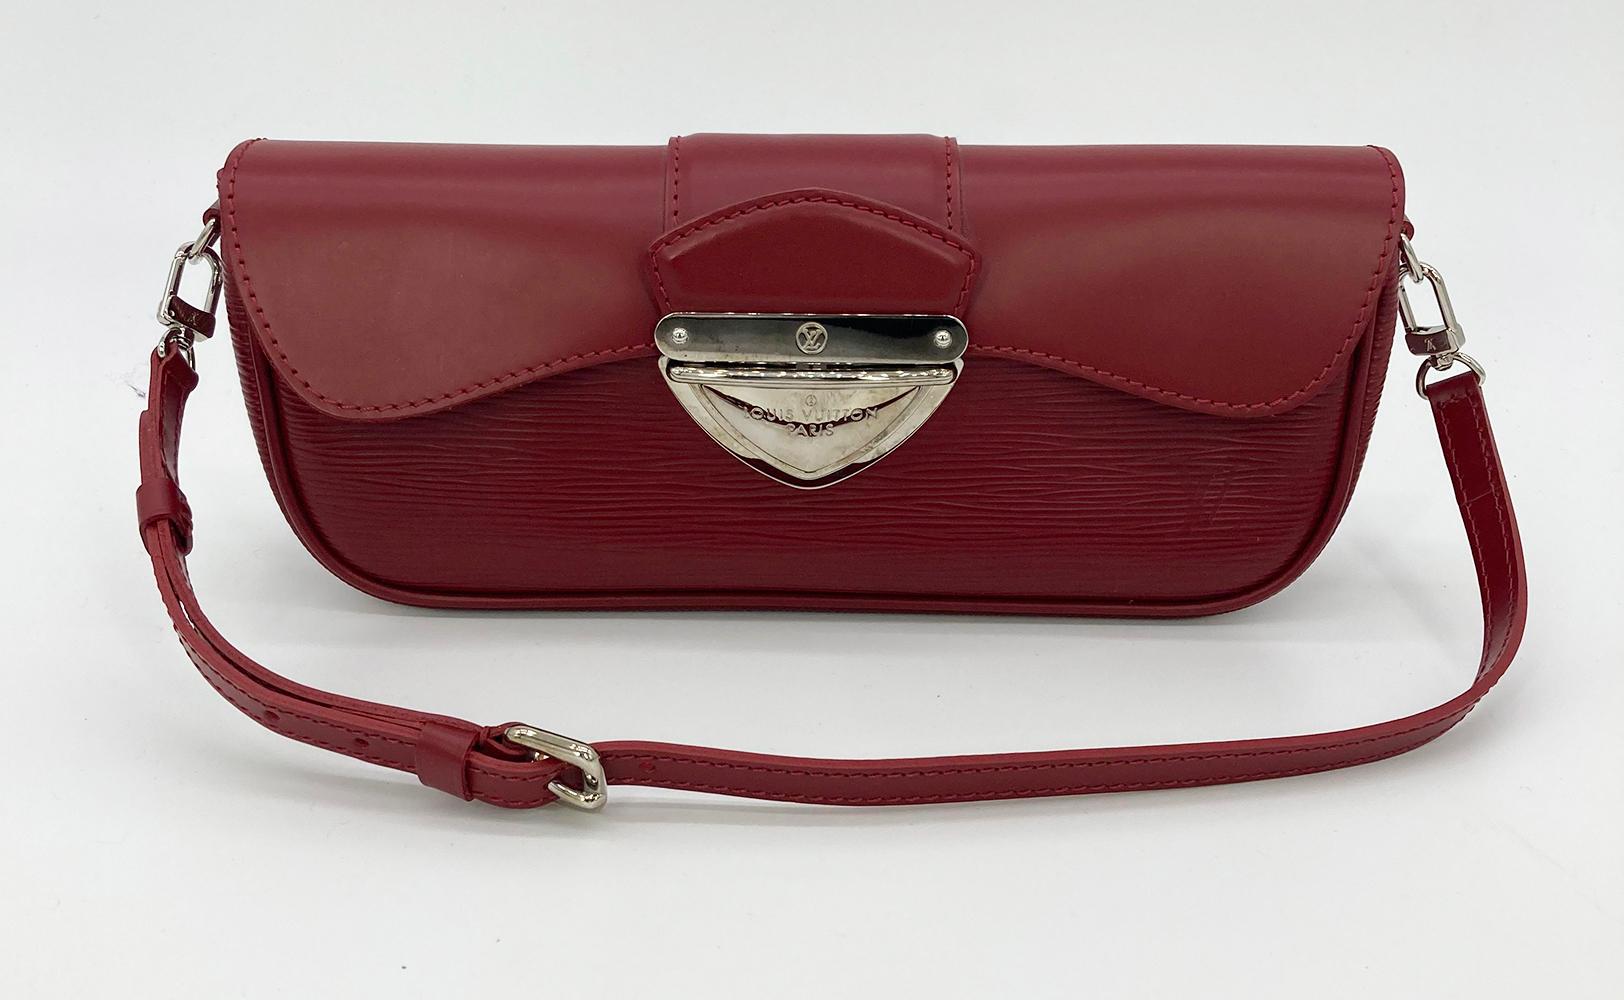 Louis Vuitton Rubis Epi Leather Montaigne Clutch Bag in good condition. Red smooth and epi leather exterior trimmed with silver hardware and a removable shoulder strap. Top flap opens via sliding latch closure to a red suede interior with one side